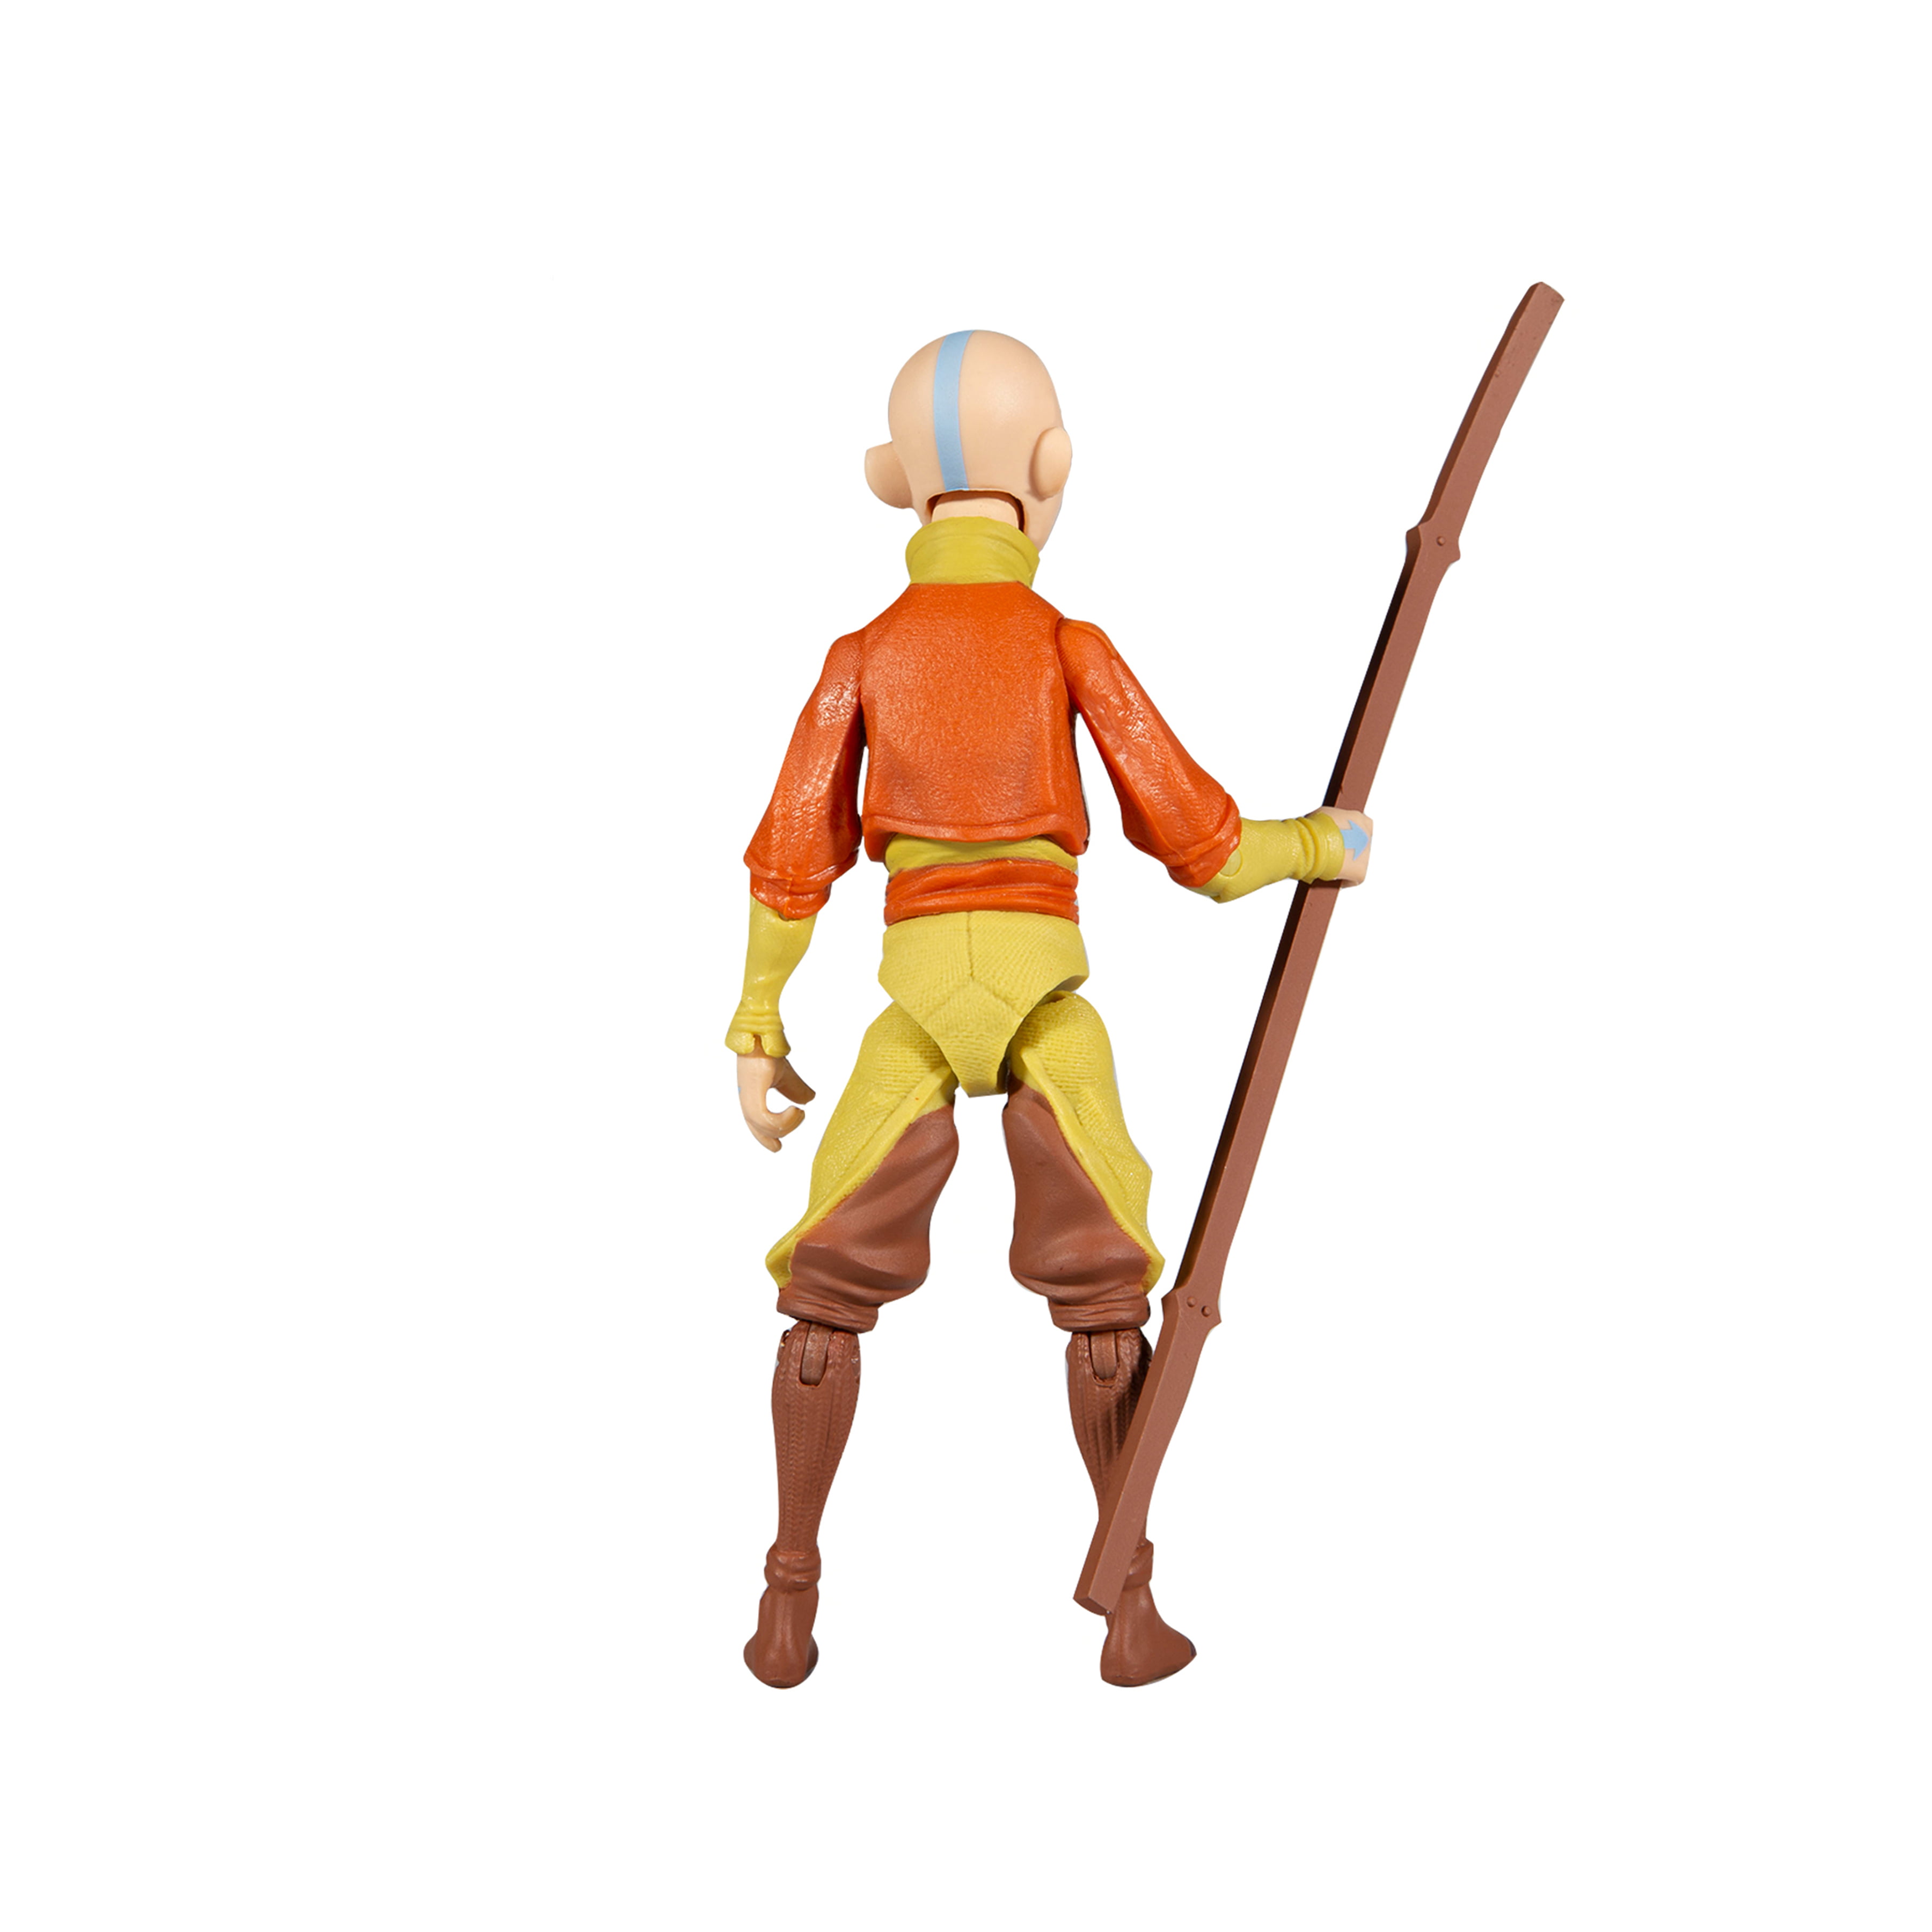 McFarlane Toy Avatar Aang With Glider 5" Actionfigur The Last Airbender 